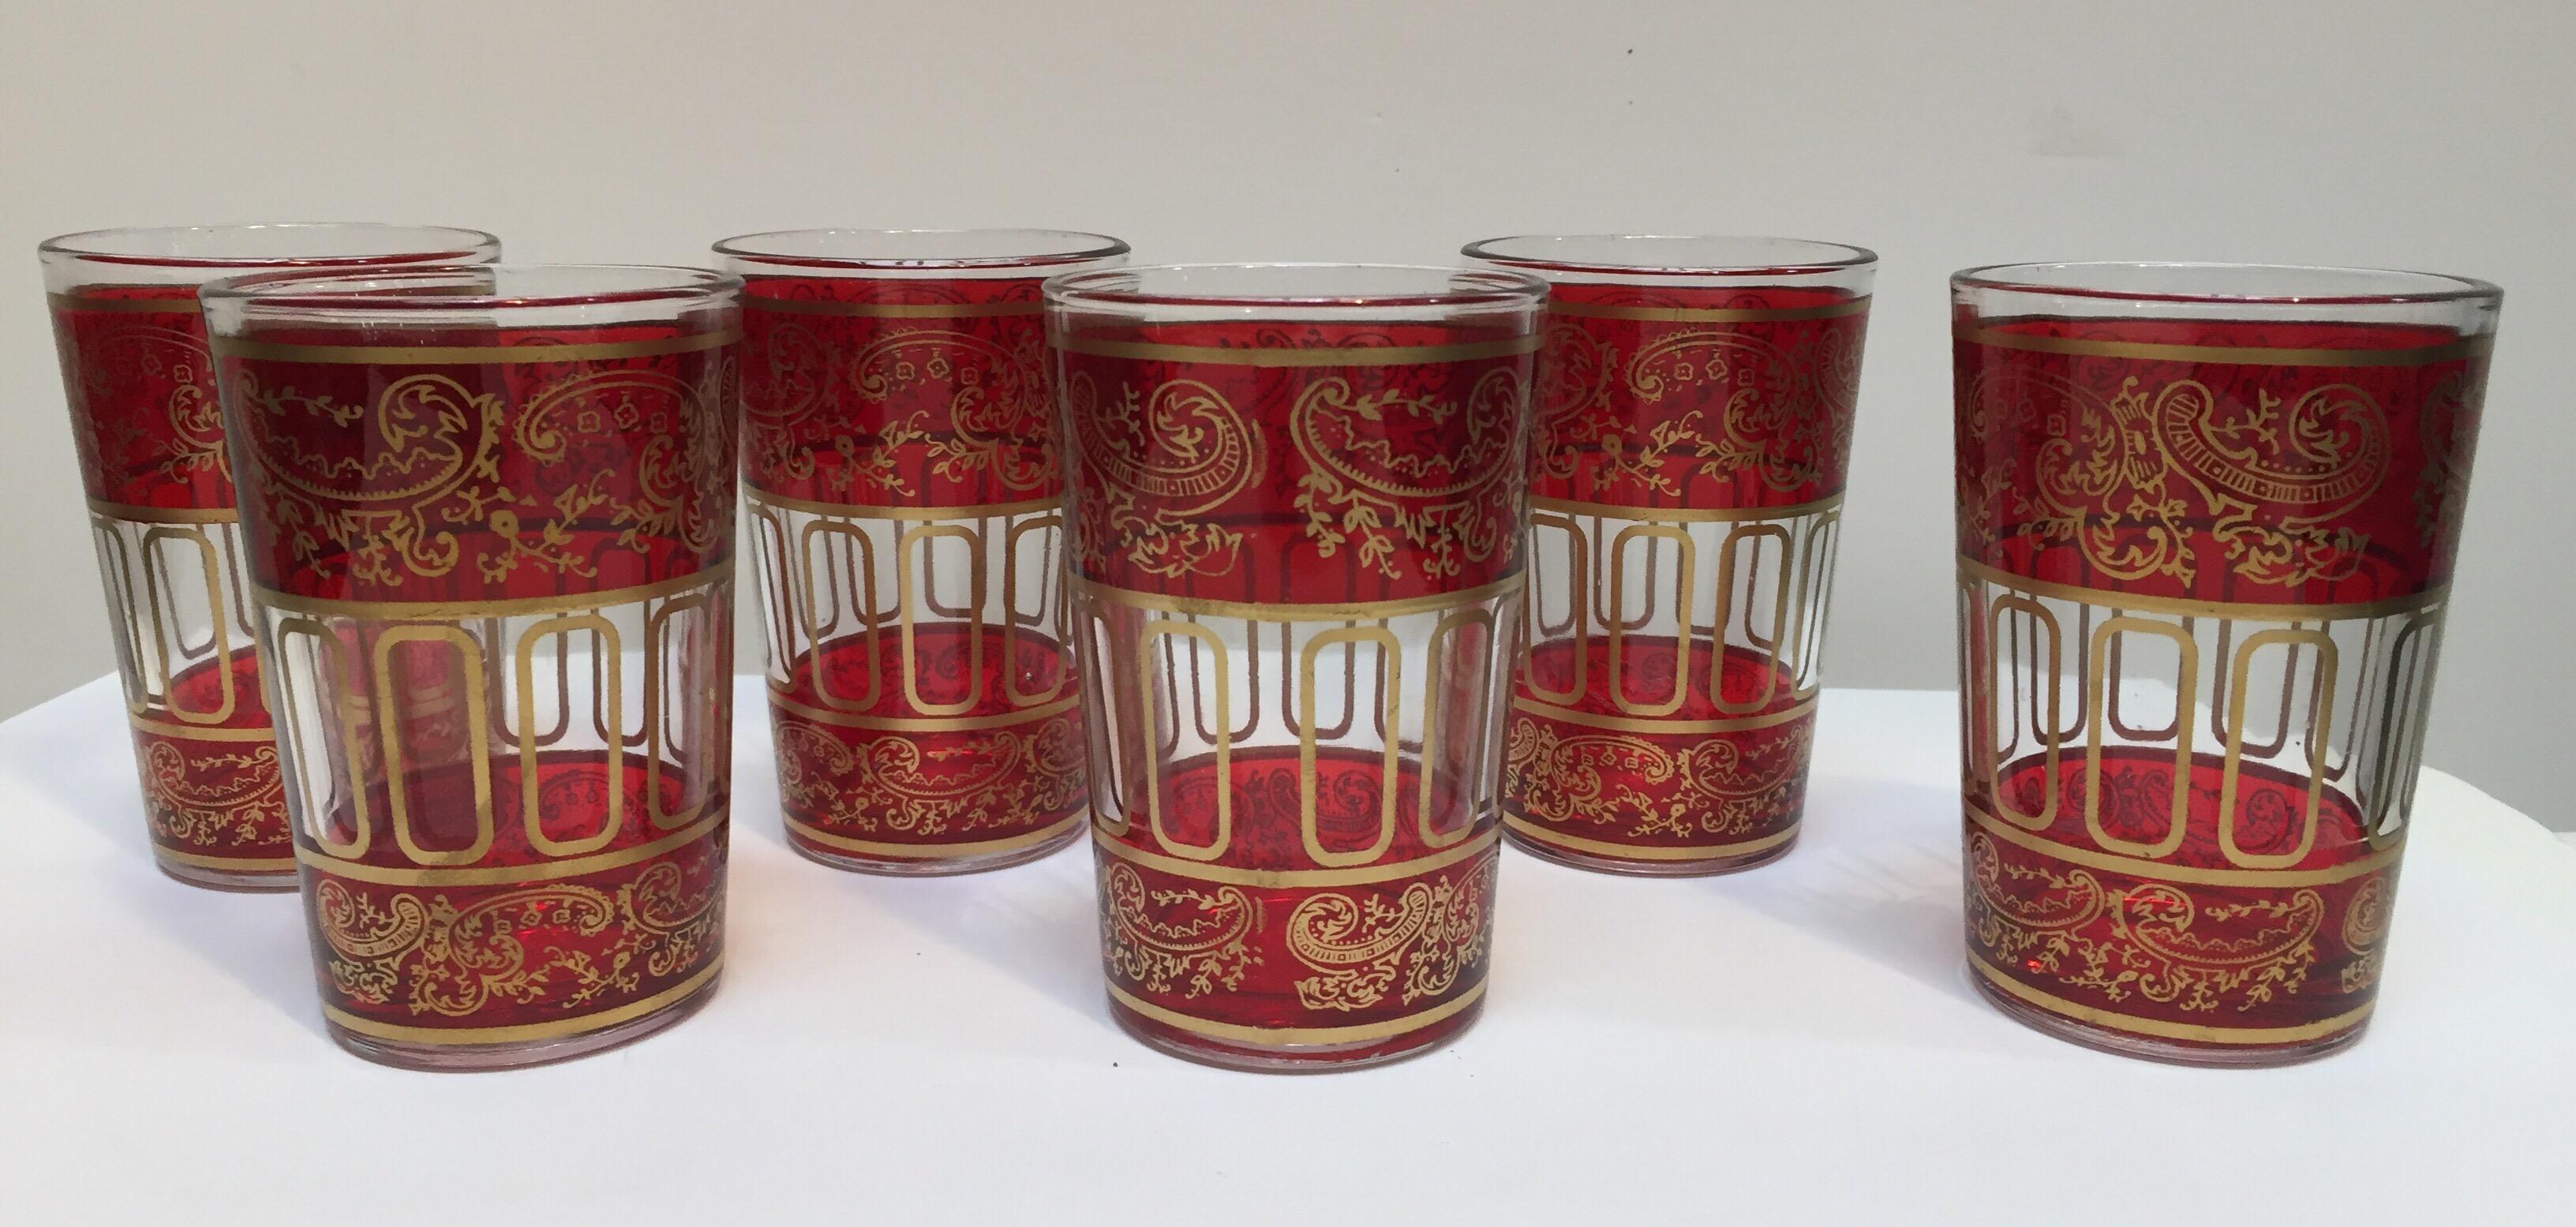 Set of six red glasses with gold raised Moorish design.
Decorated with a classical gold and pattern Moorish frieze. 
Use these elegant glasses for Moroccan tea, or any hot or cold drink.
In fantastic condition, perfect for the holidays and gorgeous